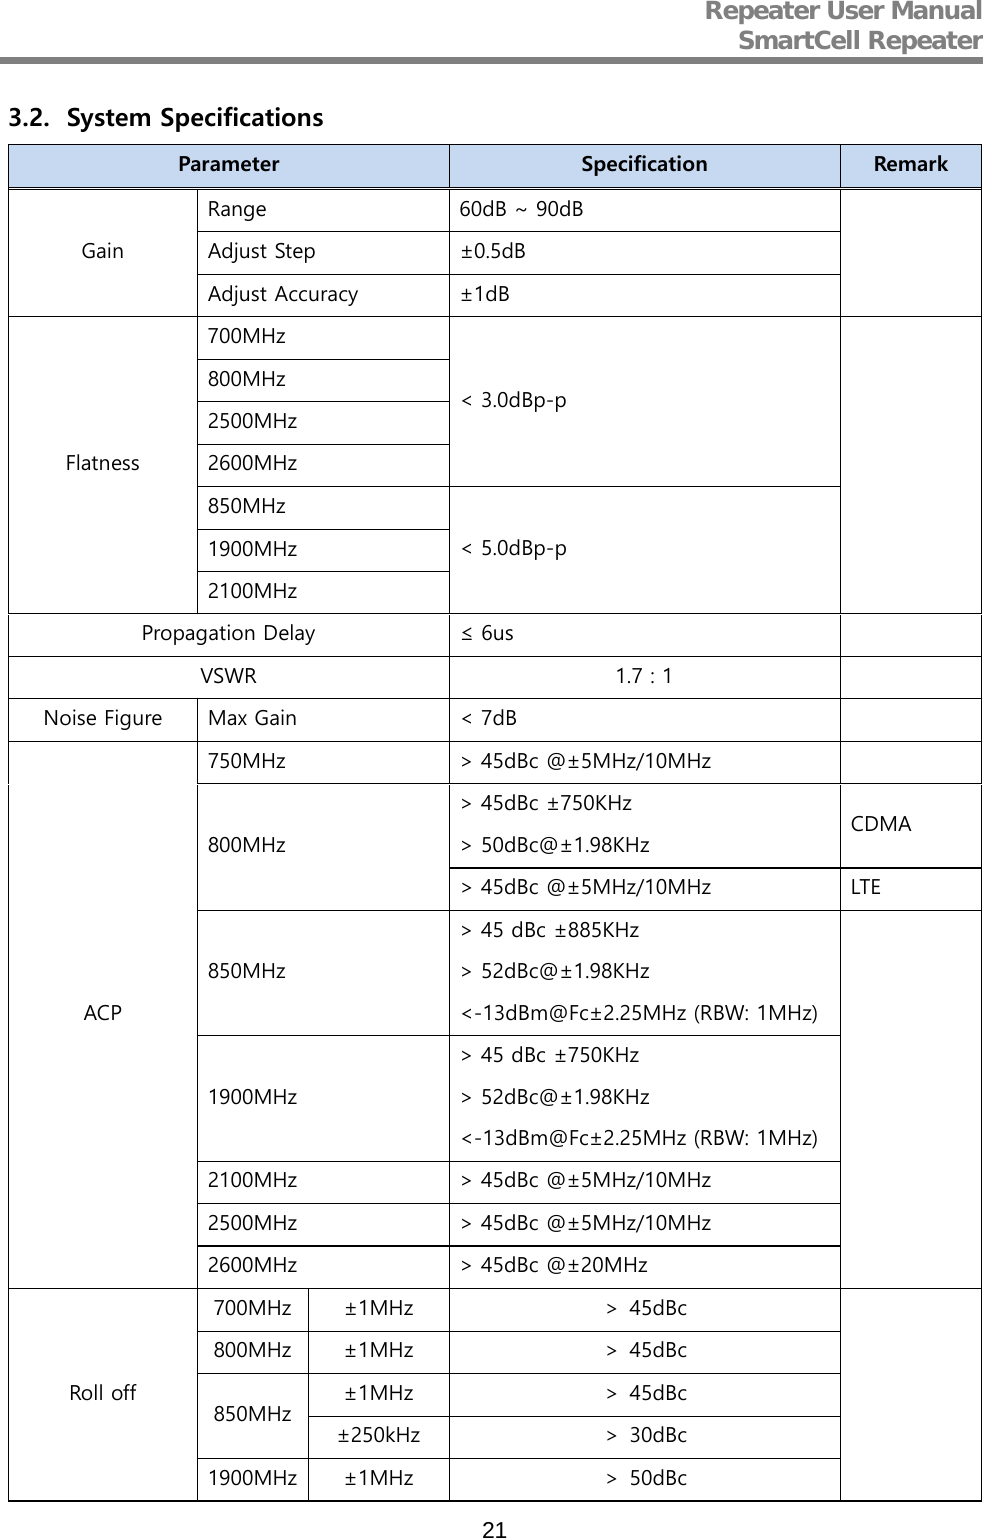 Repeater User Manual  SmartCell Repeater   21 3.2. System Specifications Parameter Specification Remark Gain Range  60dB ~ 90dB  Adjust Step  ±0.5dB Adjust Accuracy ±1dB Flatness 700MHz &lt; 3.0dBp-p   800MHz 2500MHz 2600MHz 850MHz &lt; 5.0dBp-p 1900MHz 2100MHz Propagation Delay ≤ 6us   VSWR 1.7 : 1   Noise Figure Max Gain &lt; 7dB   ACP 750MHz  &gt; 45dBc @±5MHz/10MHz   800MHz &gt; 45dBc ±750KHz &gt; 50dBc@±1.98KHz CDMA &gt; 45dBc @±5MHz/10MHz LTE 850MHz &gt; 45 dBc ±885KHz &gt; 52dBc@±1.98KHz &lt;-13dBm@Fc±2.25MHz (RBW: 1MHz)  1900MHz &gt; 45 dBc ±750KHz &gt; 52dBc@±1.98KHz &lt;-13dBm@Fc±2.25MHz (RBW: 1MHz) 2100MHz  &gt; 45dBc @±5MHz/10MHz 2500MHz  &gt; 45dBc @±5MHz/10MHz 2600MHz  &gt; 45dBc @±20MHz Roll off 700MHz ±1MHz ＞ 45dBc  800MHz ±1MHz ＞ 45dBc 850MHz ±1MHz ＞ 45dBc ±250kHz ＞ 30dBc 1900MHz ±1MHz ＞ 50dBc 